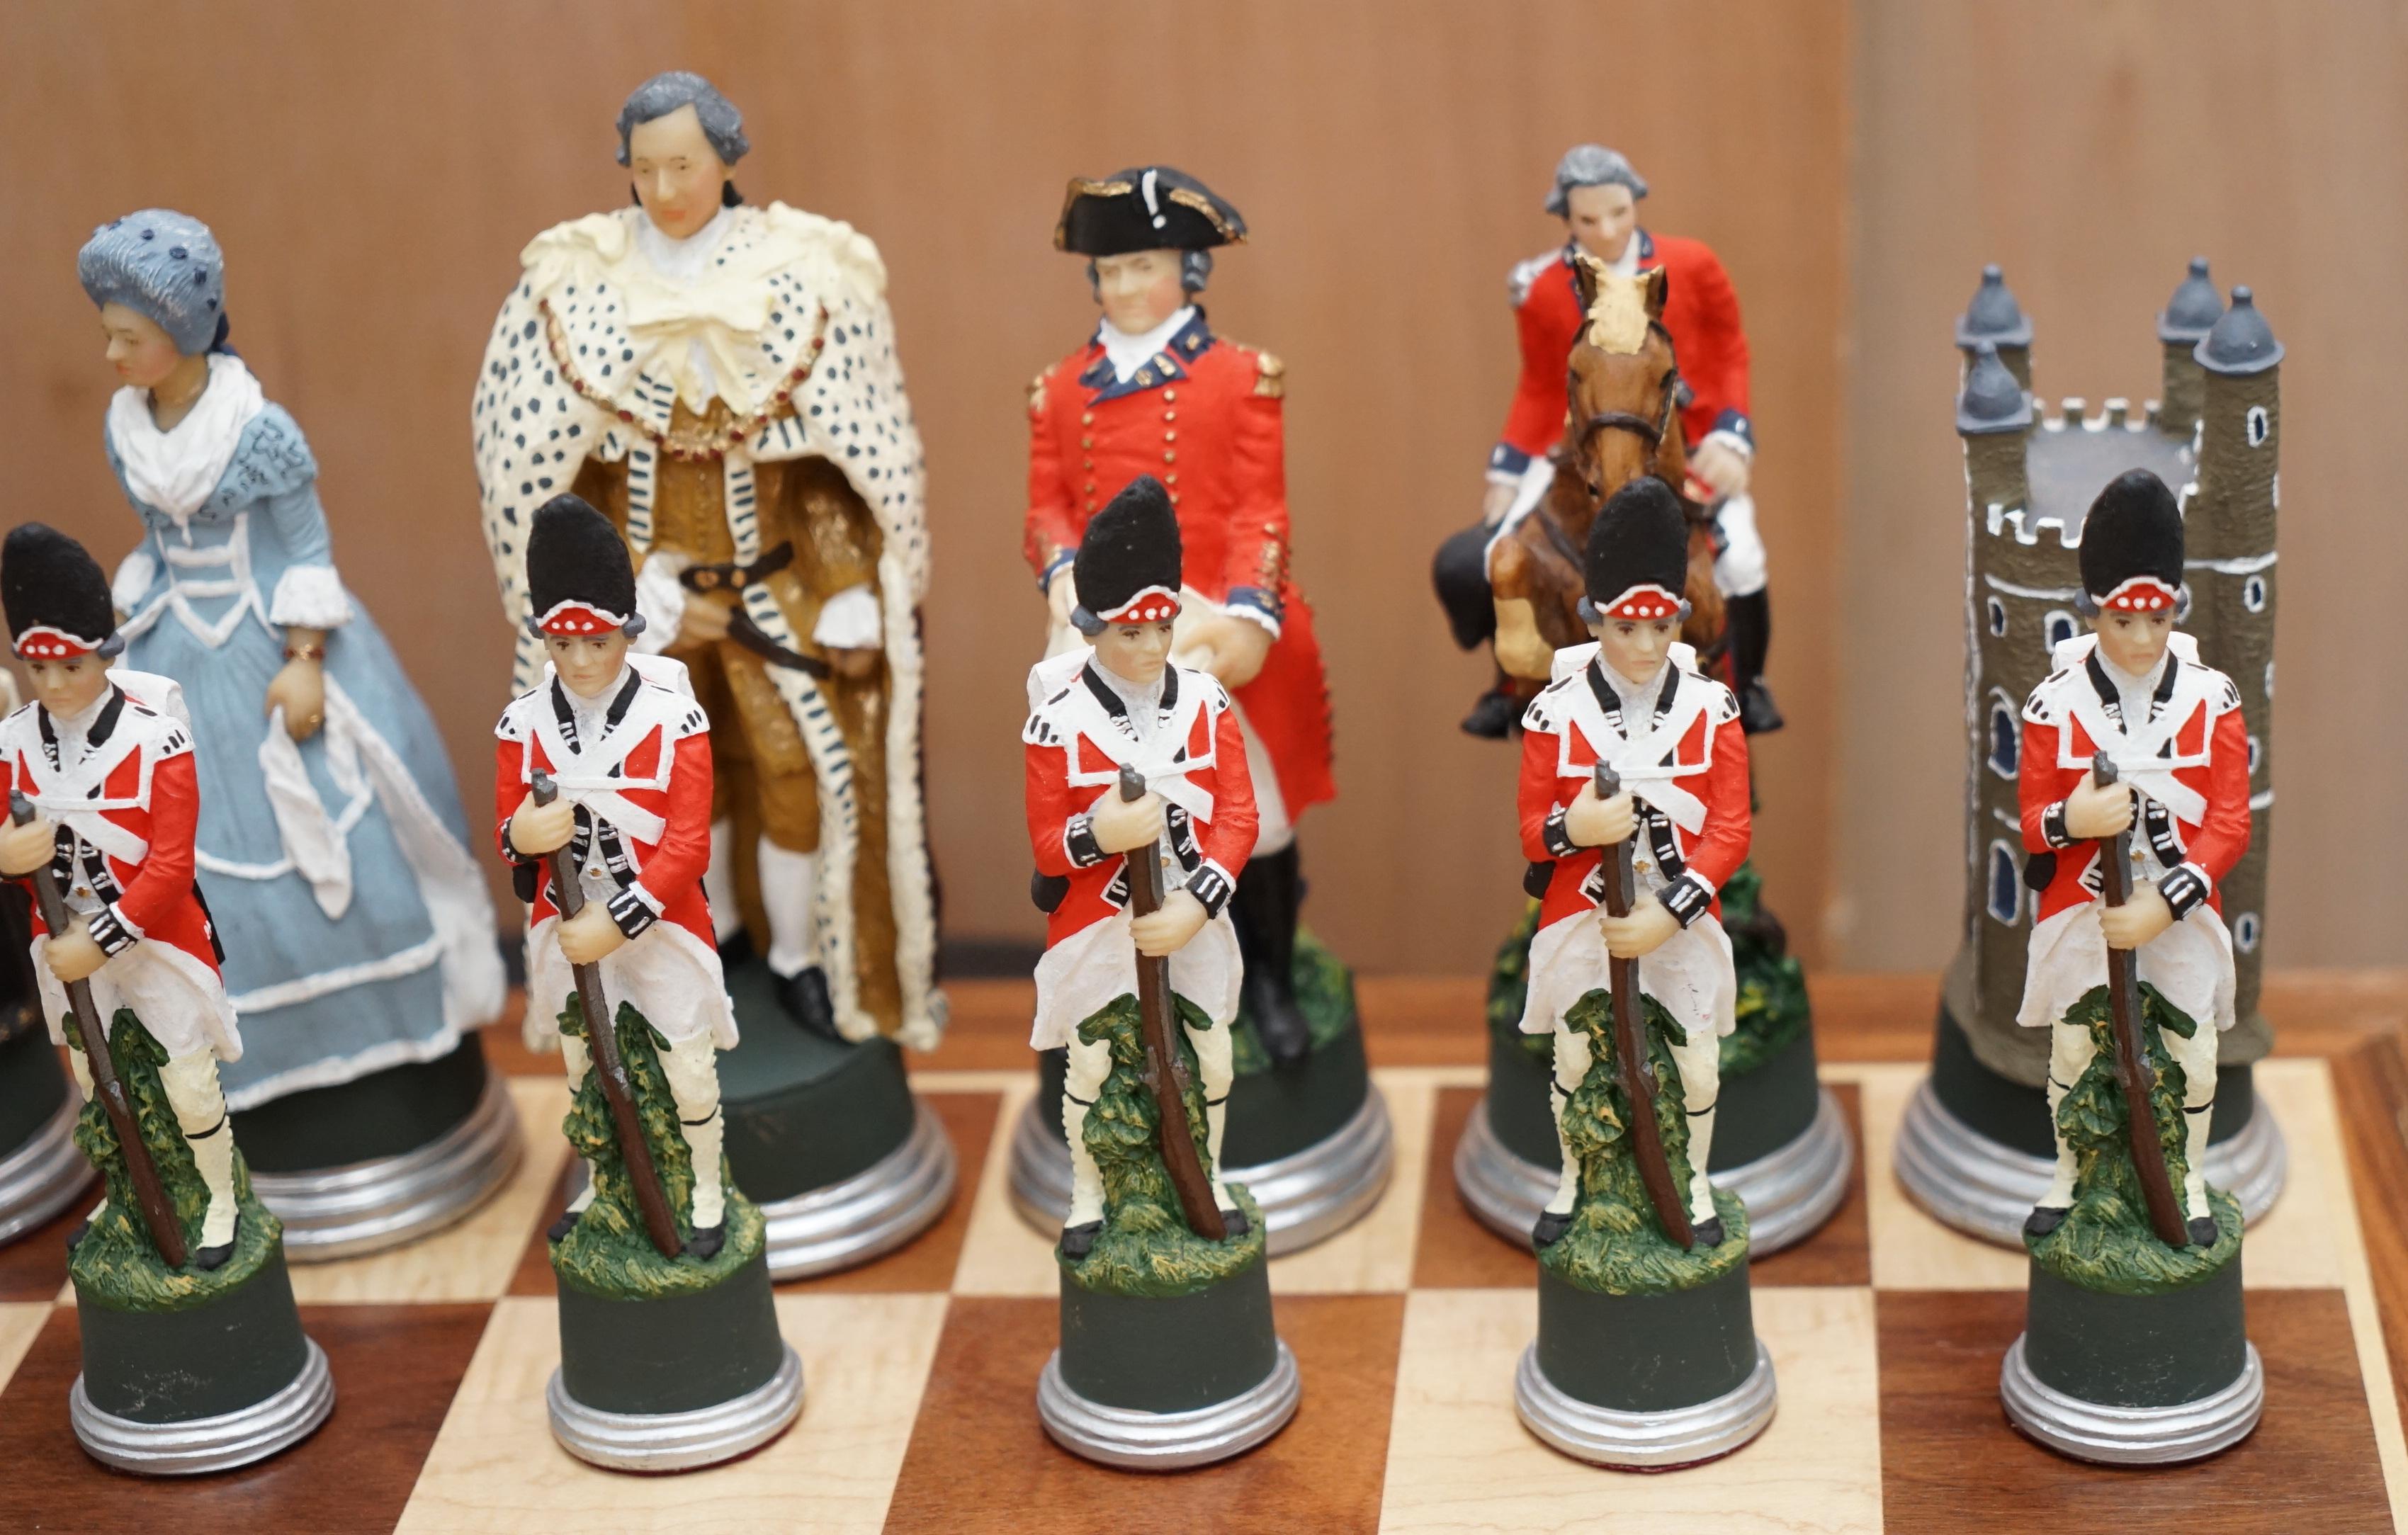 American Colonial Very Rare Collectors American Civil War of Independence Hand Painted Chess Set